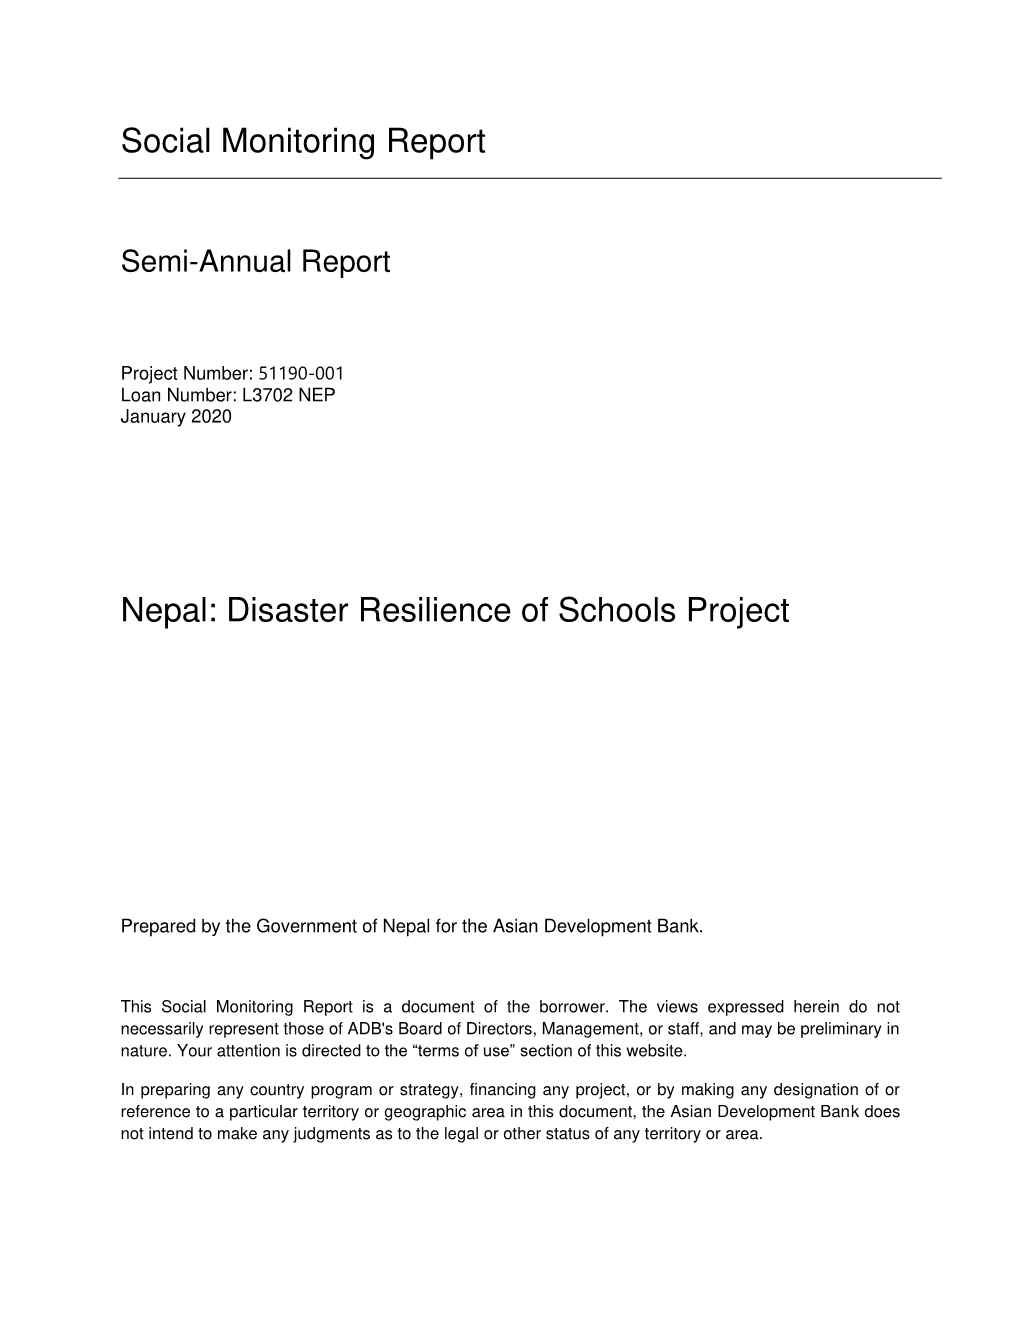 Disaster Resilience of Schools Project